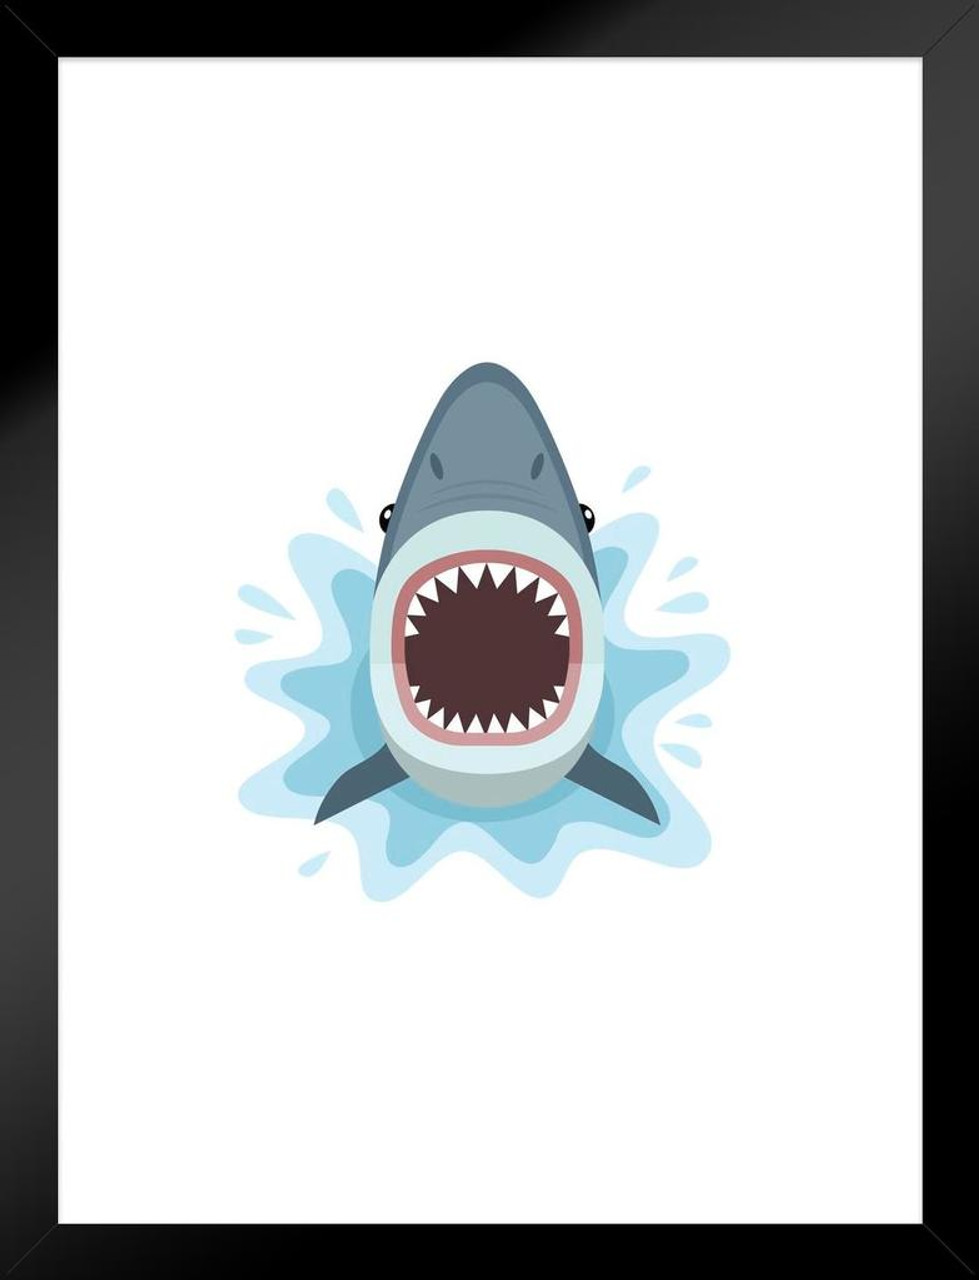 Shark Jaws Attacks From The Water Illustration Shark Posters For Walls  Shark Pictures Cool Sharks Of The World Poster Shark Wall Decor Ocean  Poster